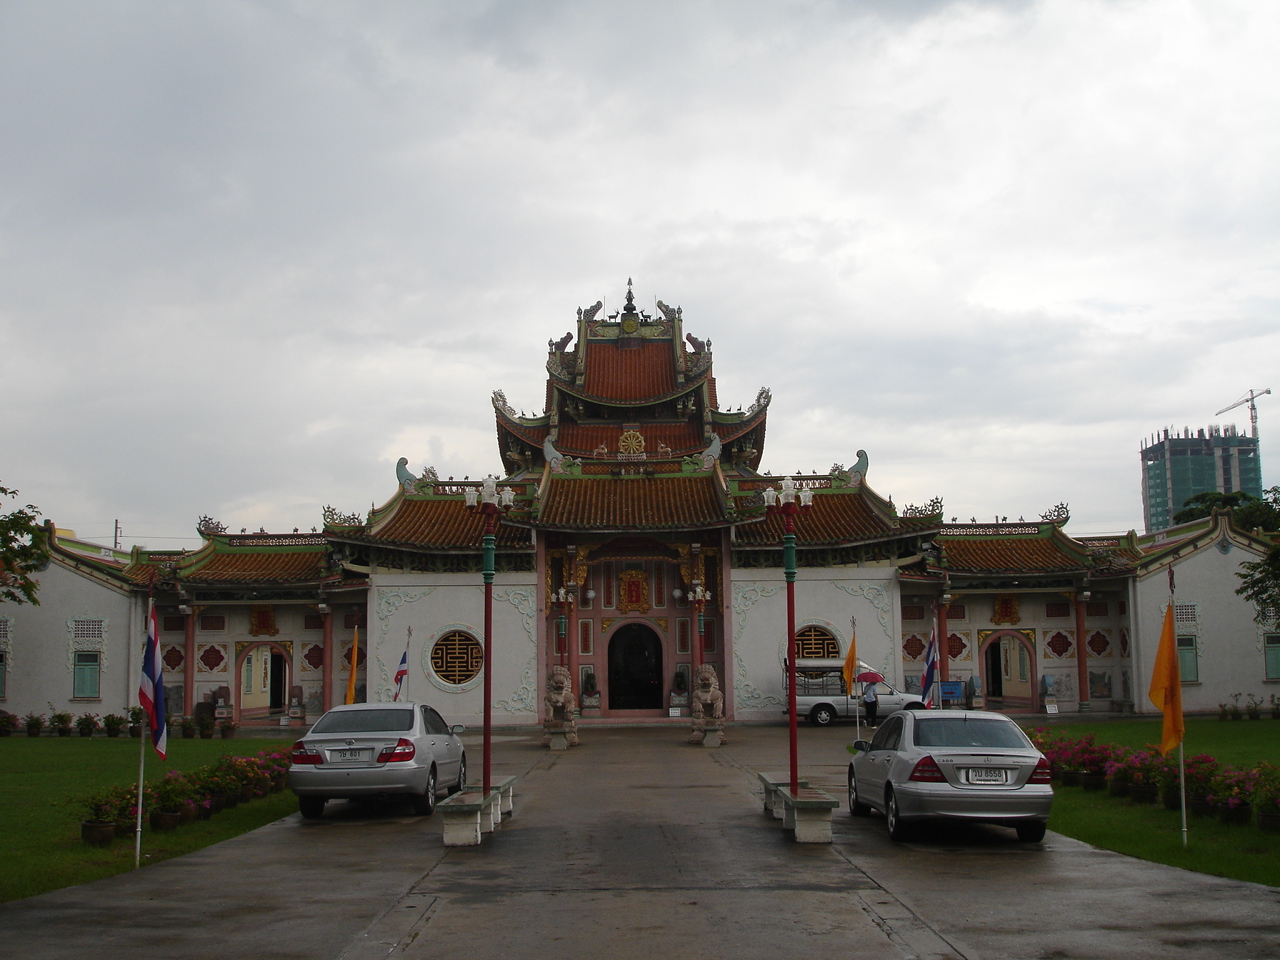 the large building with the pagoda on it is made of stucco